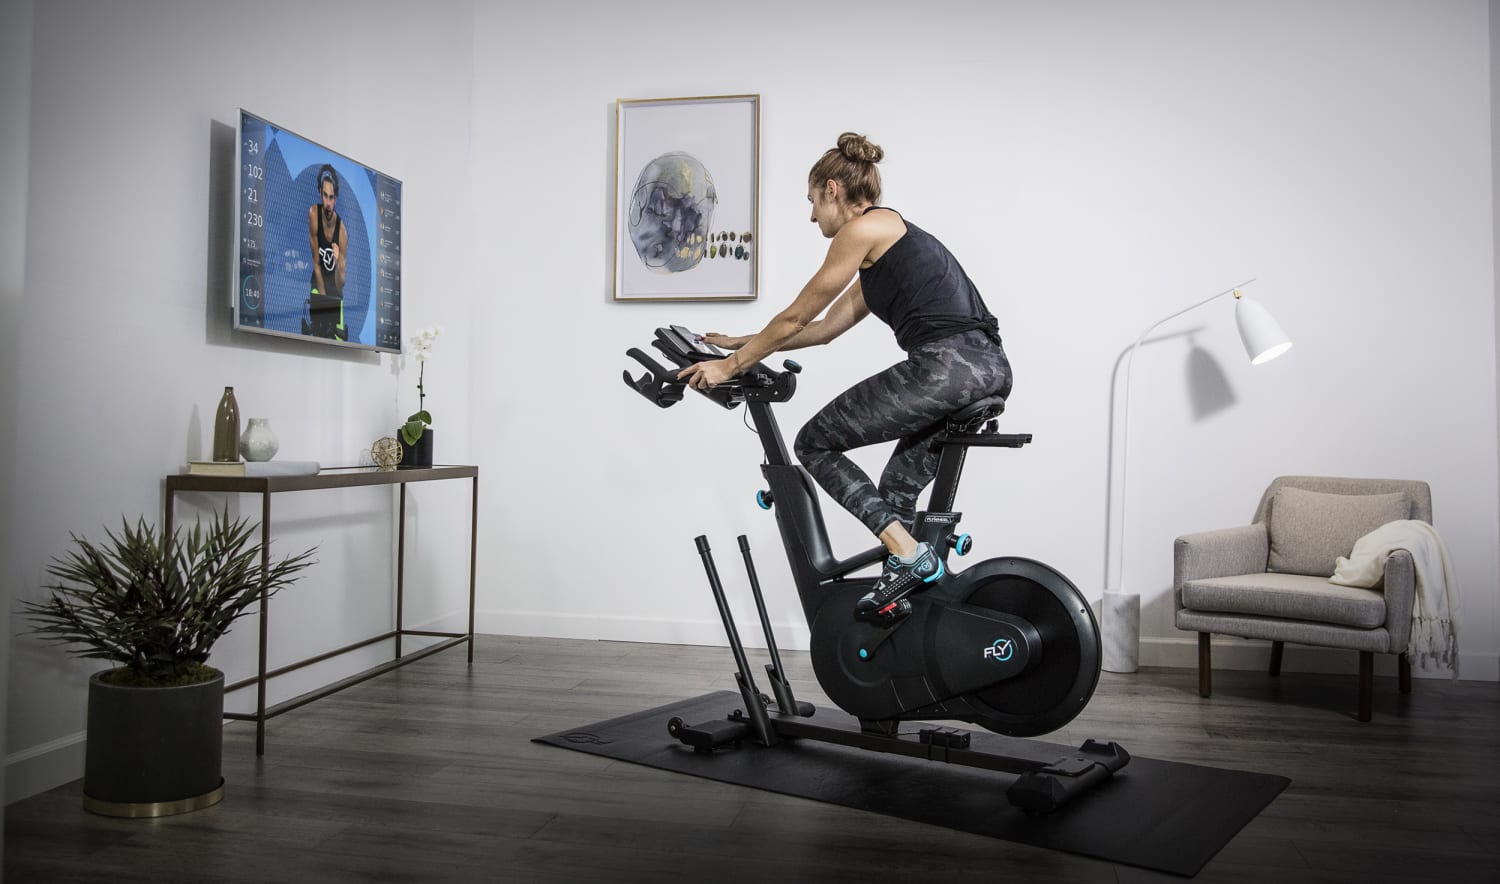 Flywheels stationary bike is back to its Black Friday sale price today